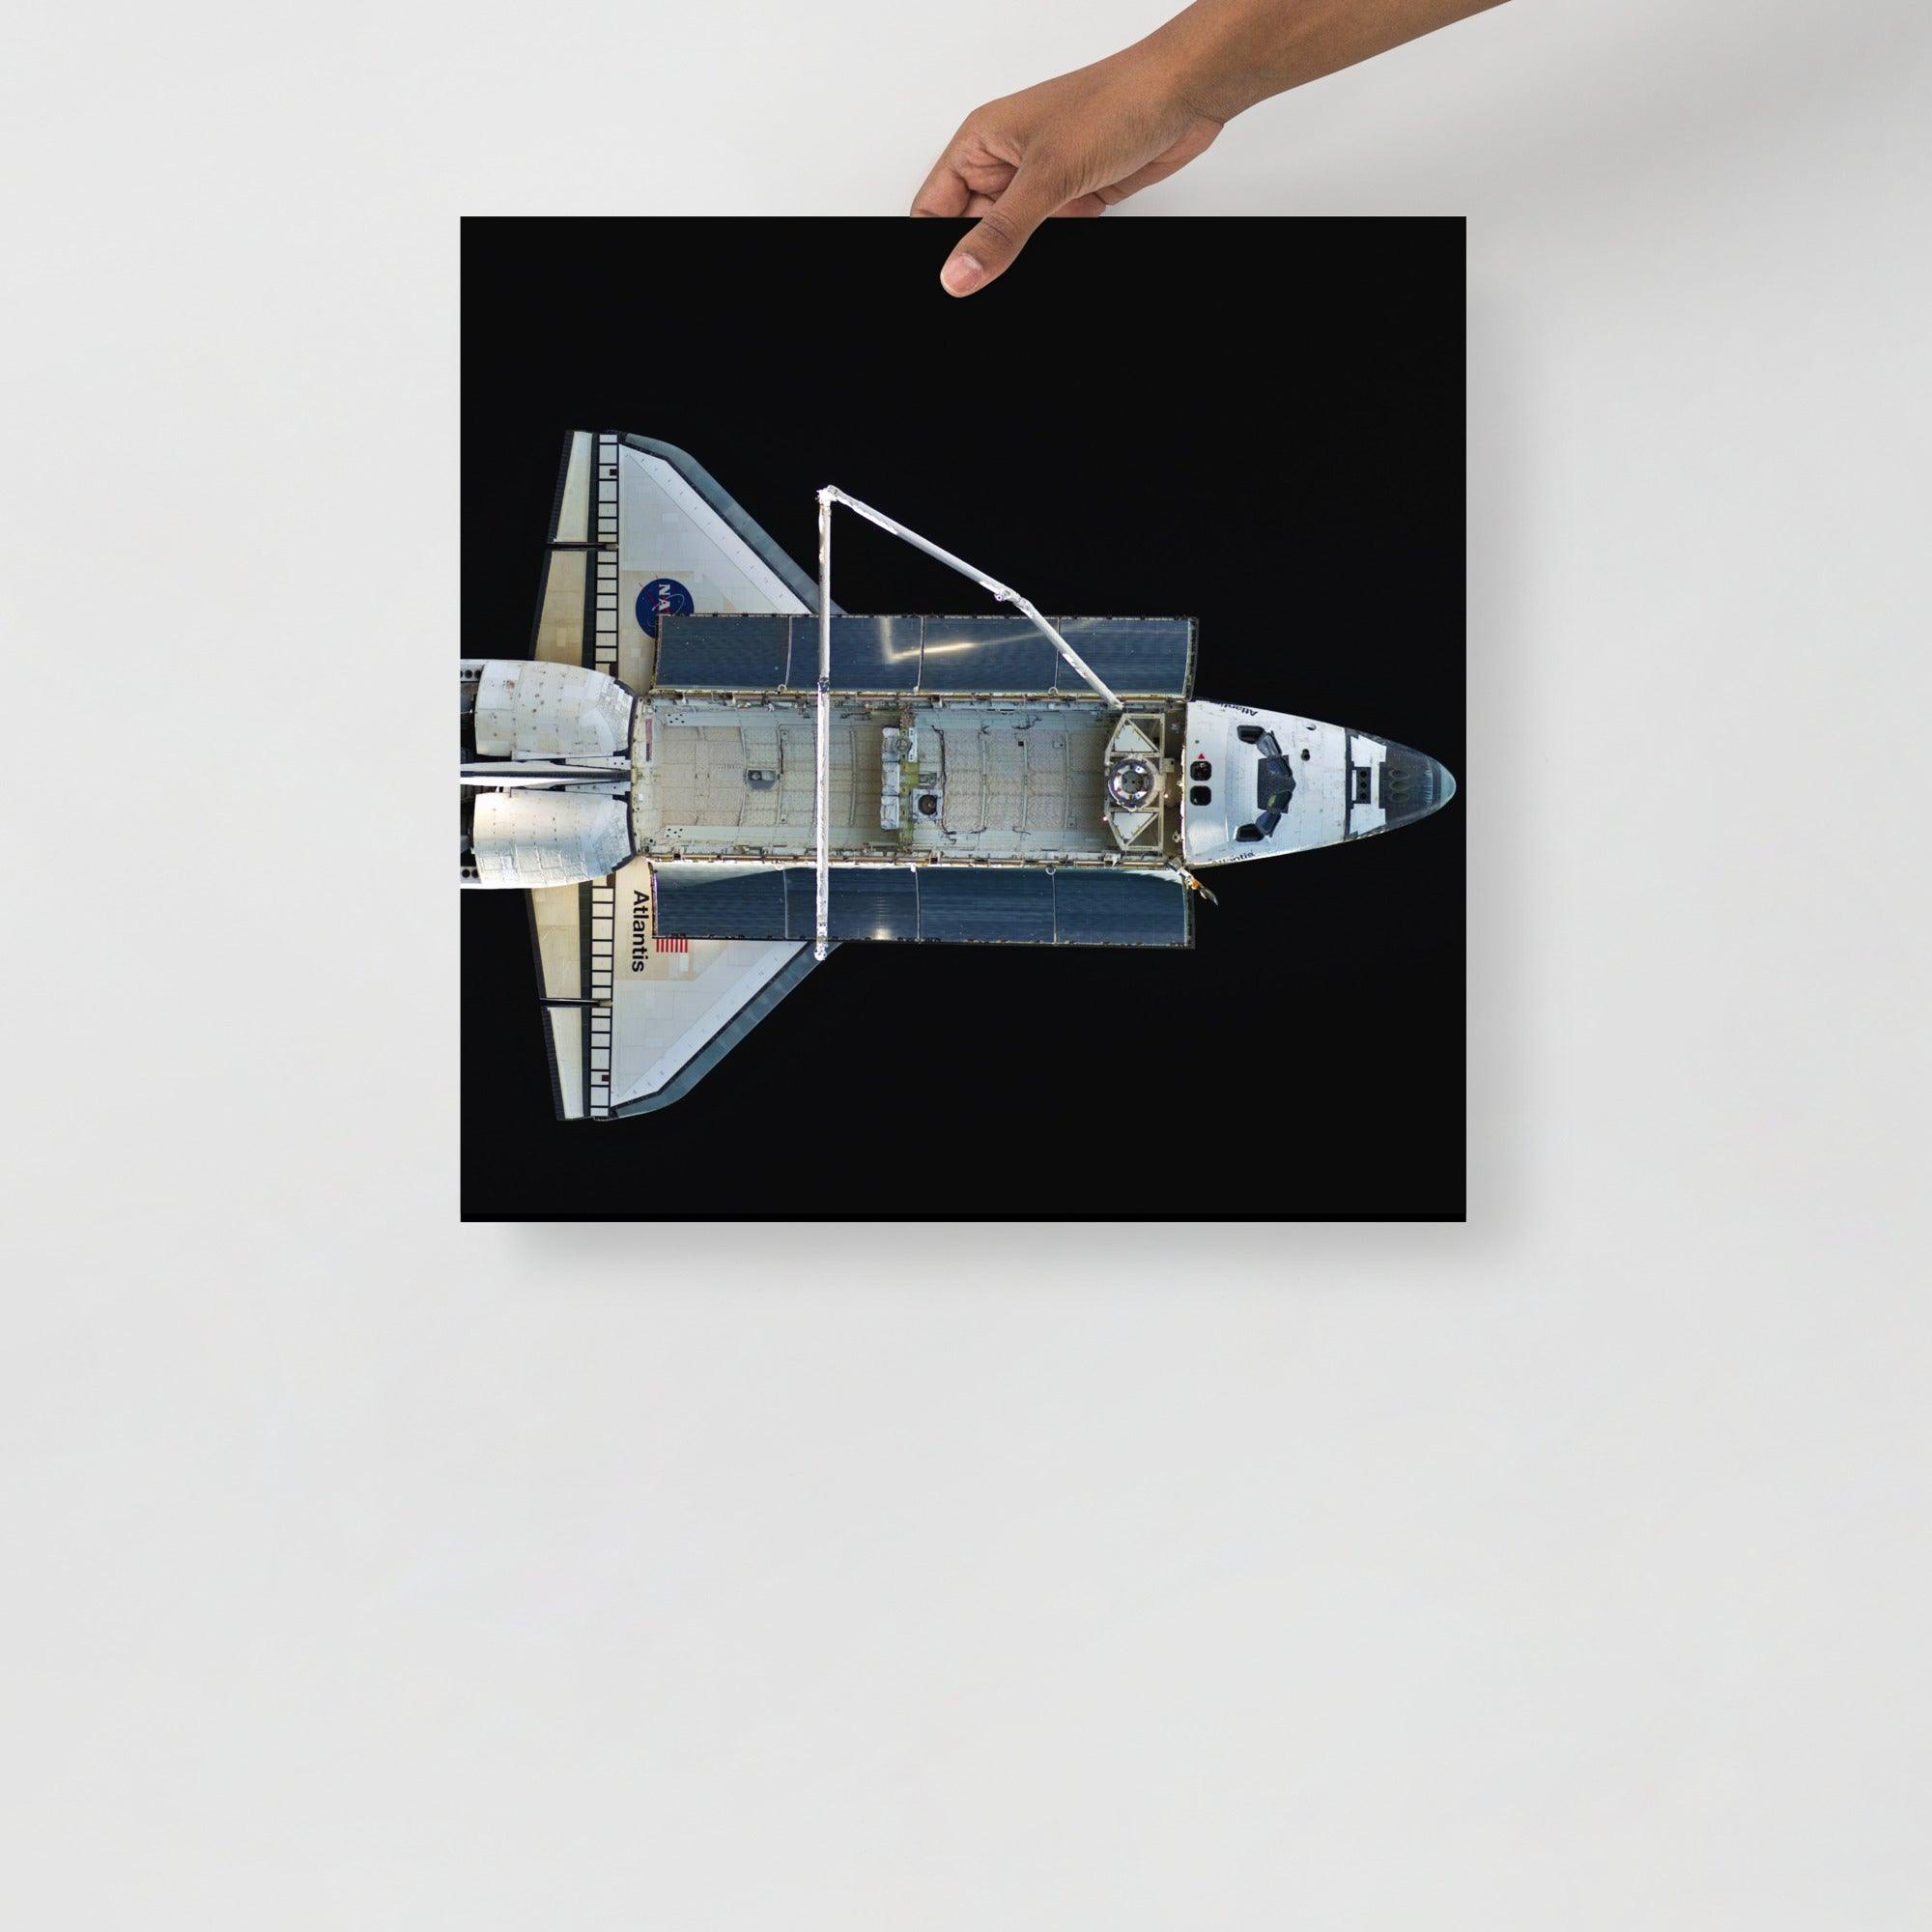 A Space Shuttle Atlantis poster on a plain backdrop in size 18x18”.